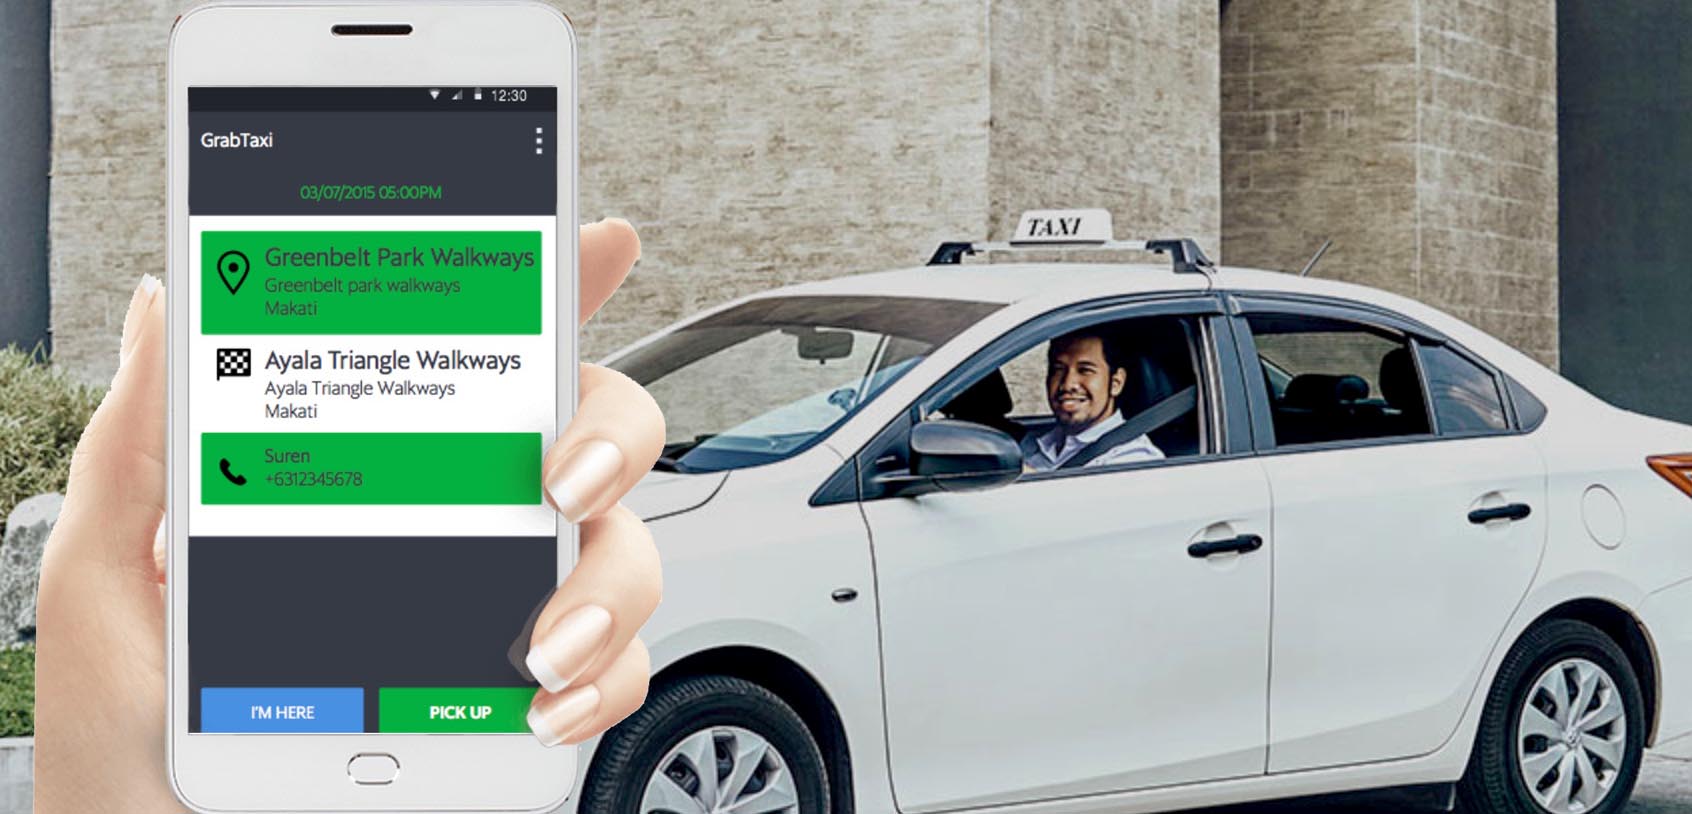 Grab PH trained 7,000 GrabTaxis to adapt and welcome cashless payments